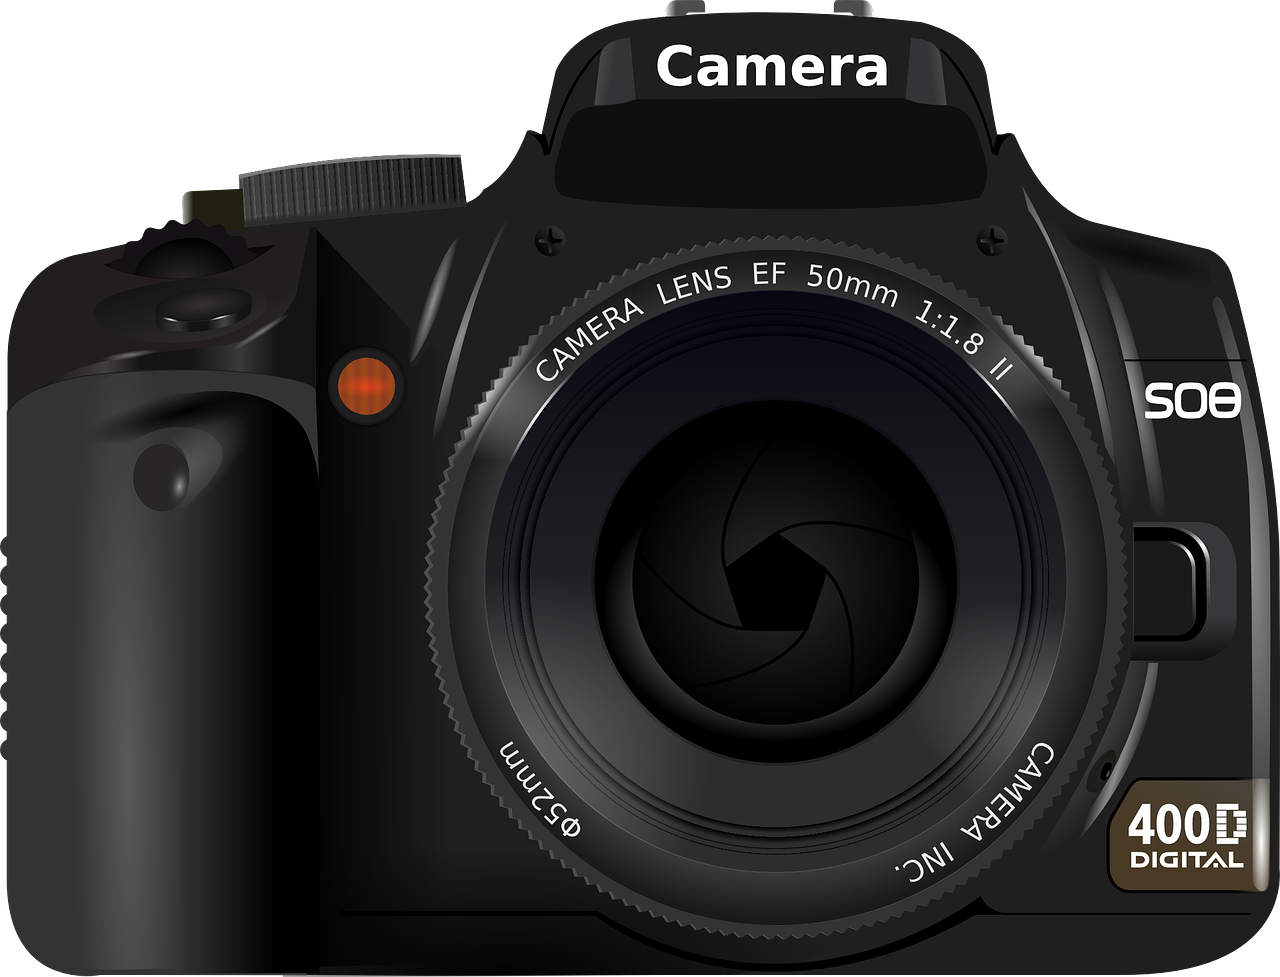 Cameras famous youtubers use. Clipart camera summer